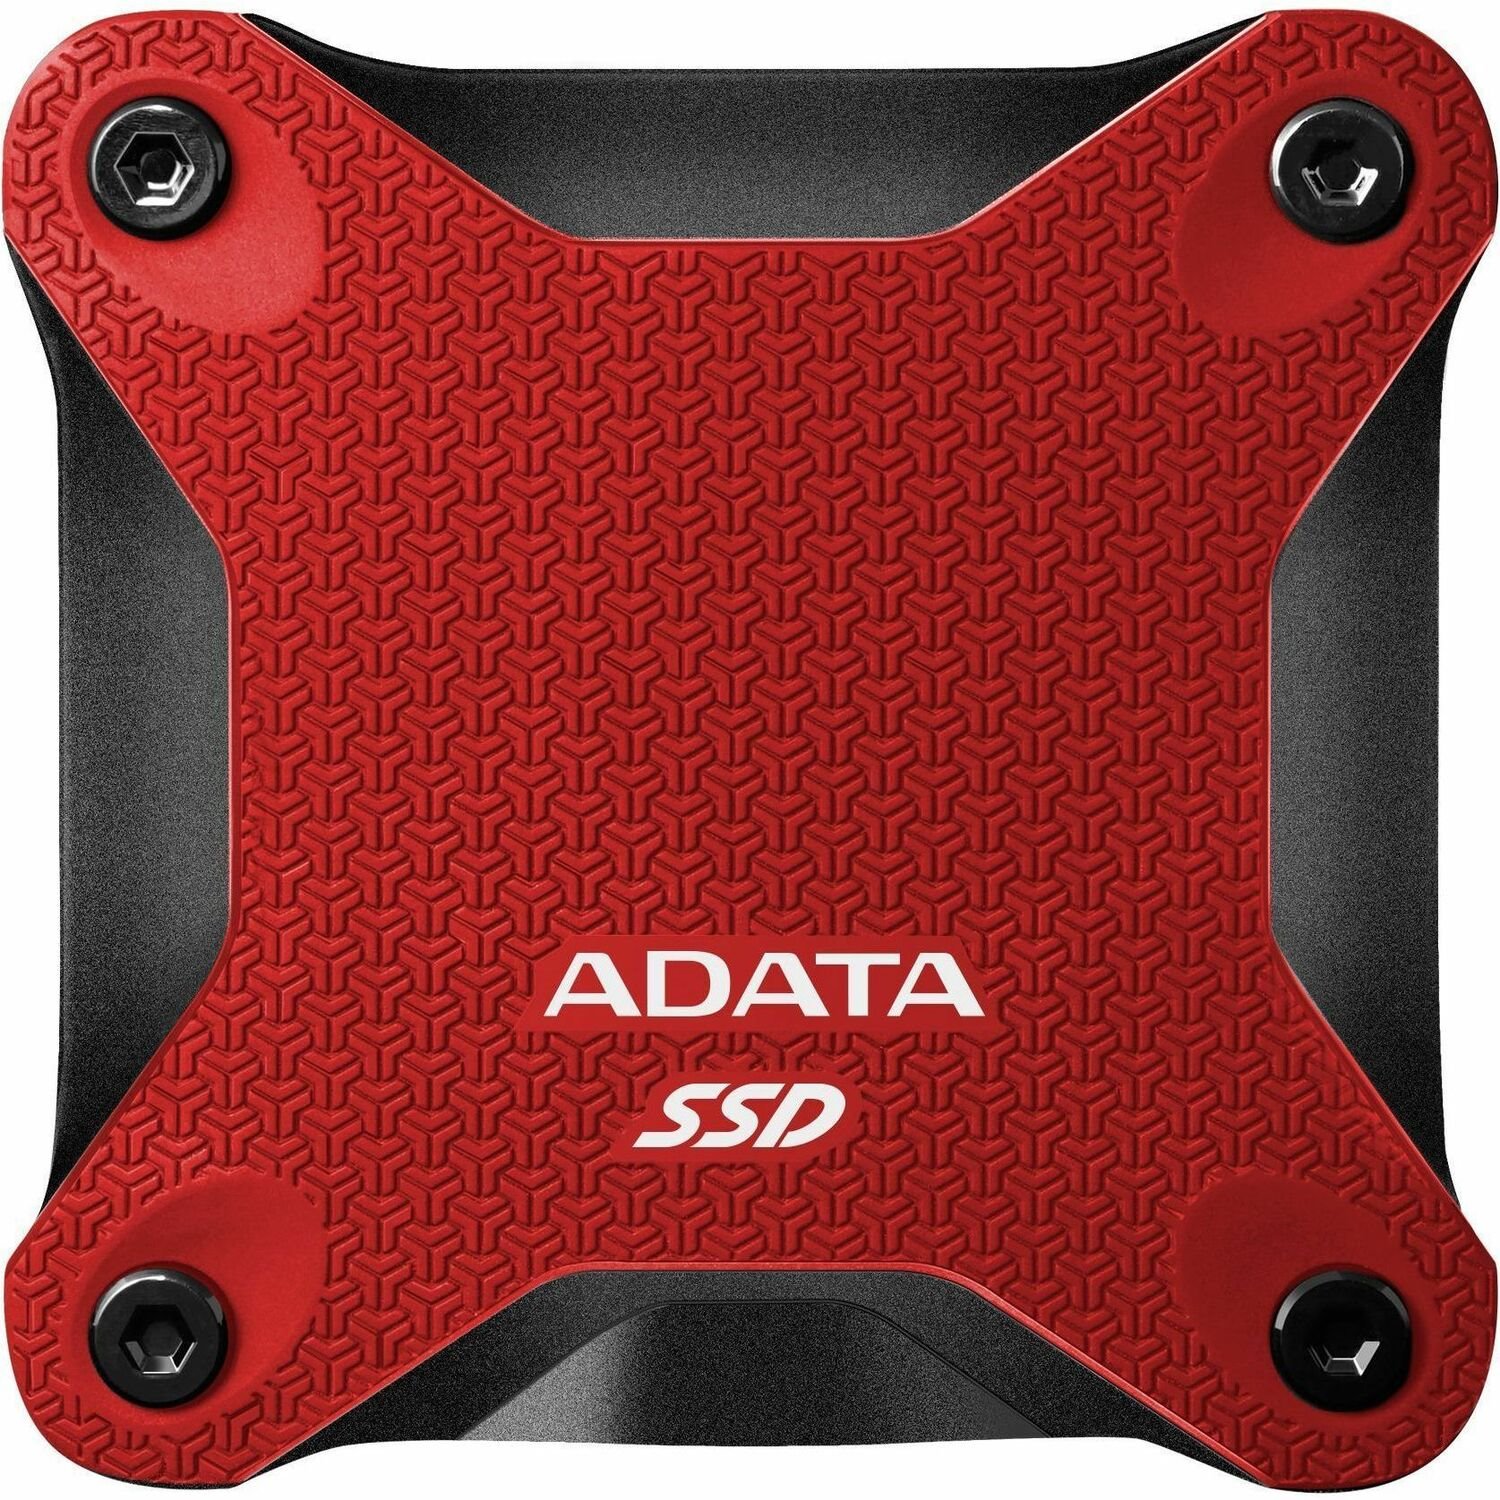 Adata SD600Q 480 GB Portable Solid State Drive - External - Red